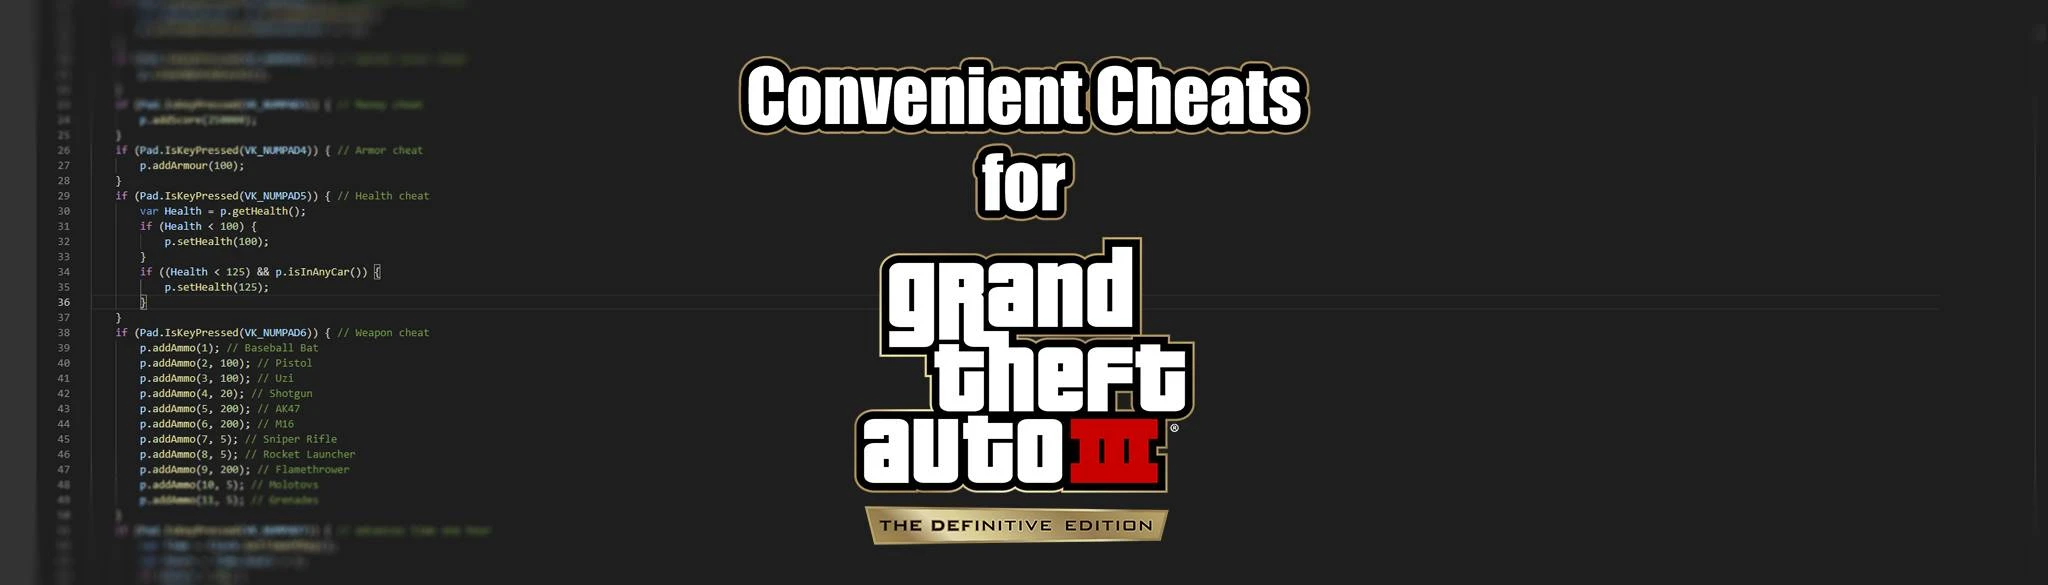 GTA 3 Cheat Codes for PC: Money, armour, and health cheats